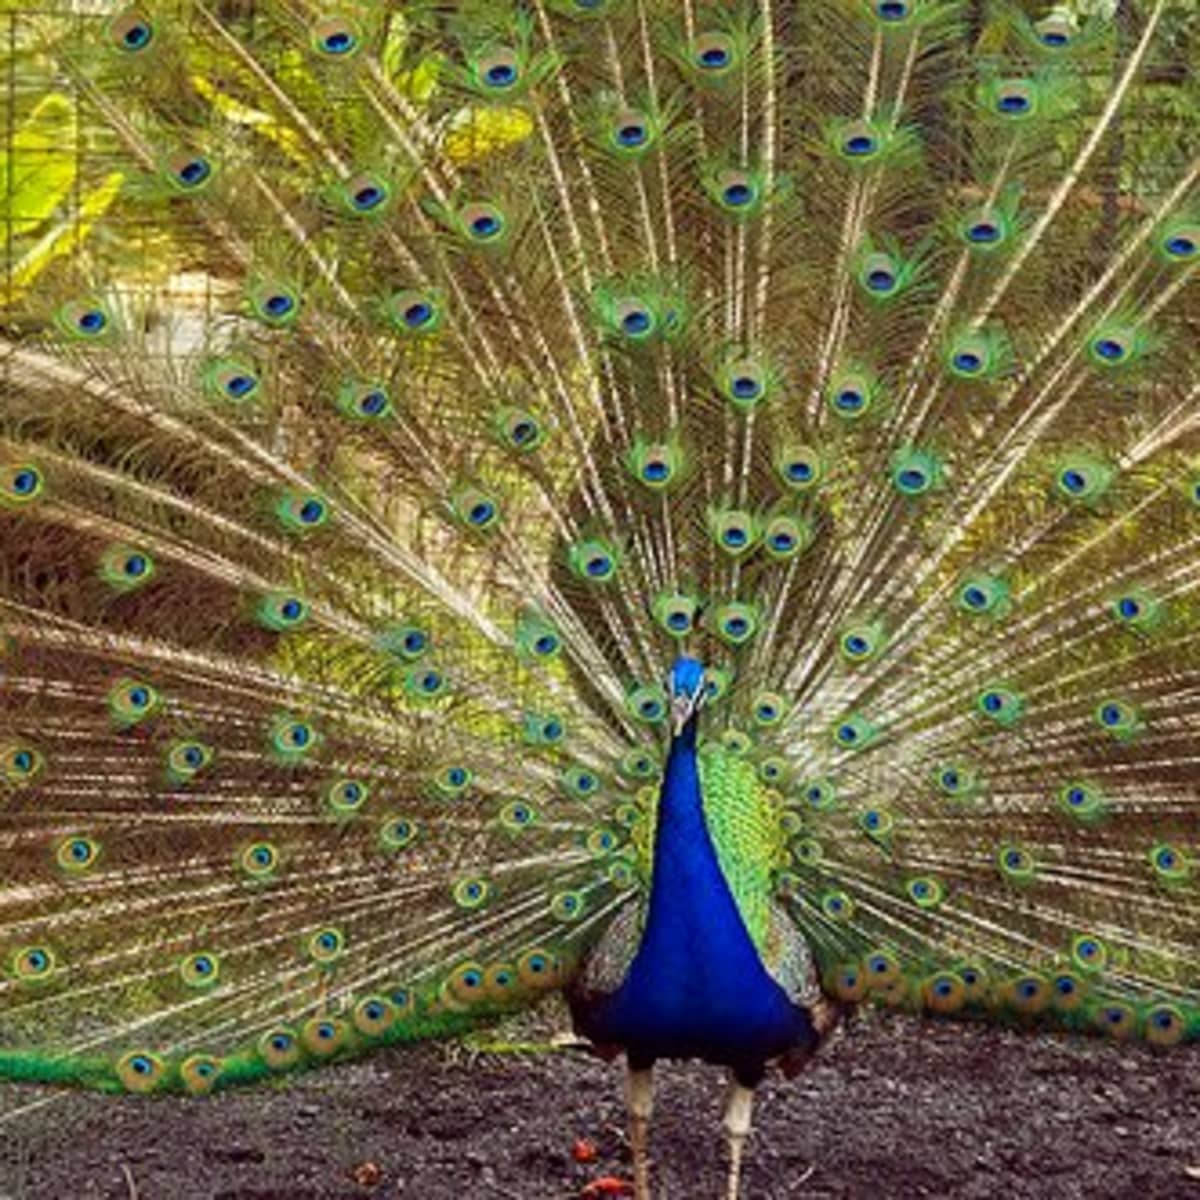 Peacock Bird Characteristics, Pictures and Symbolism - HubPages